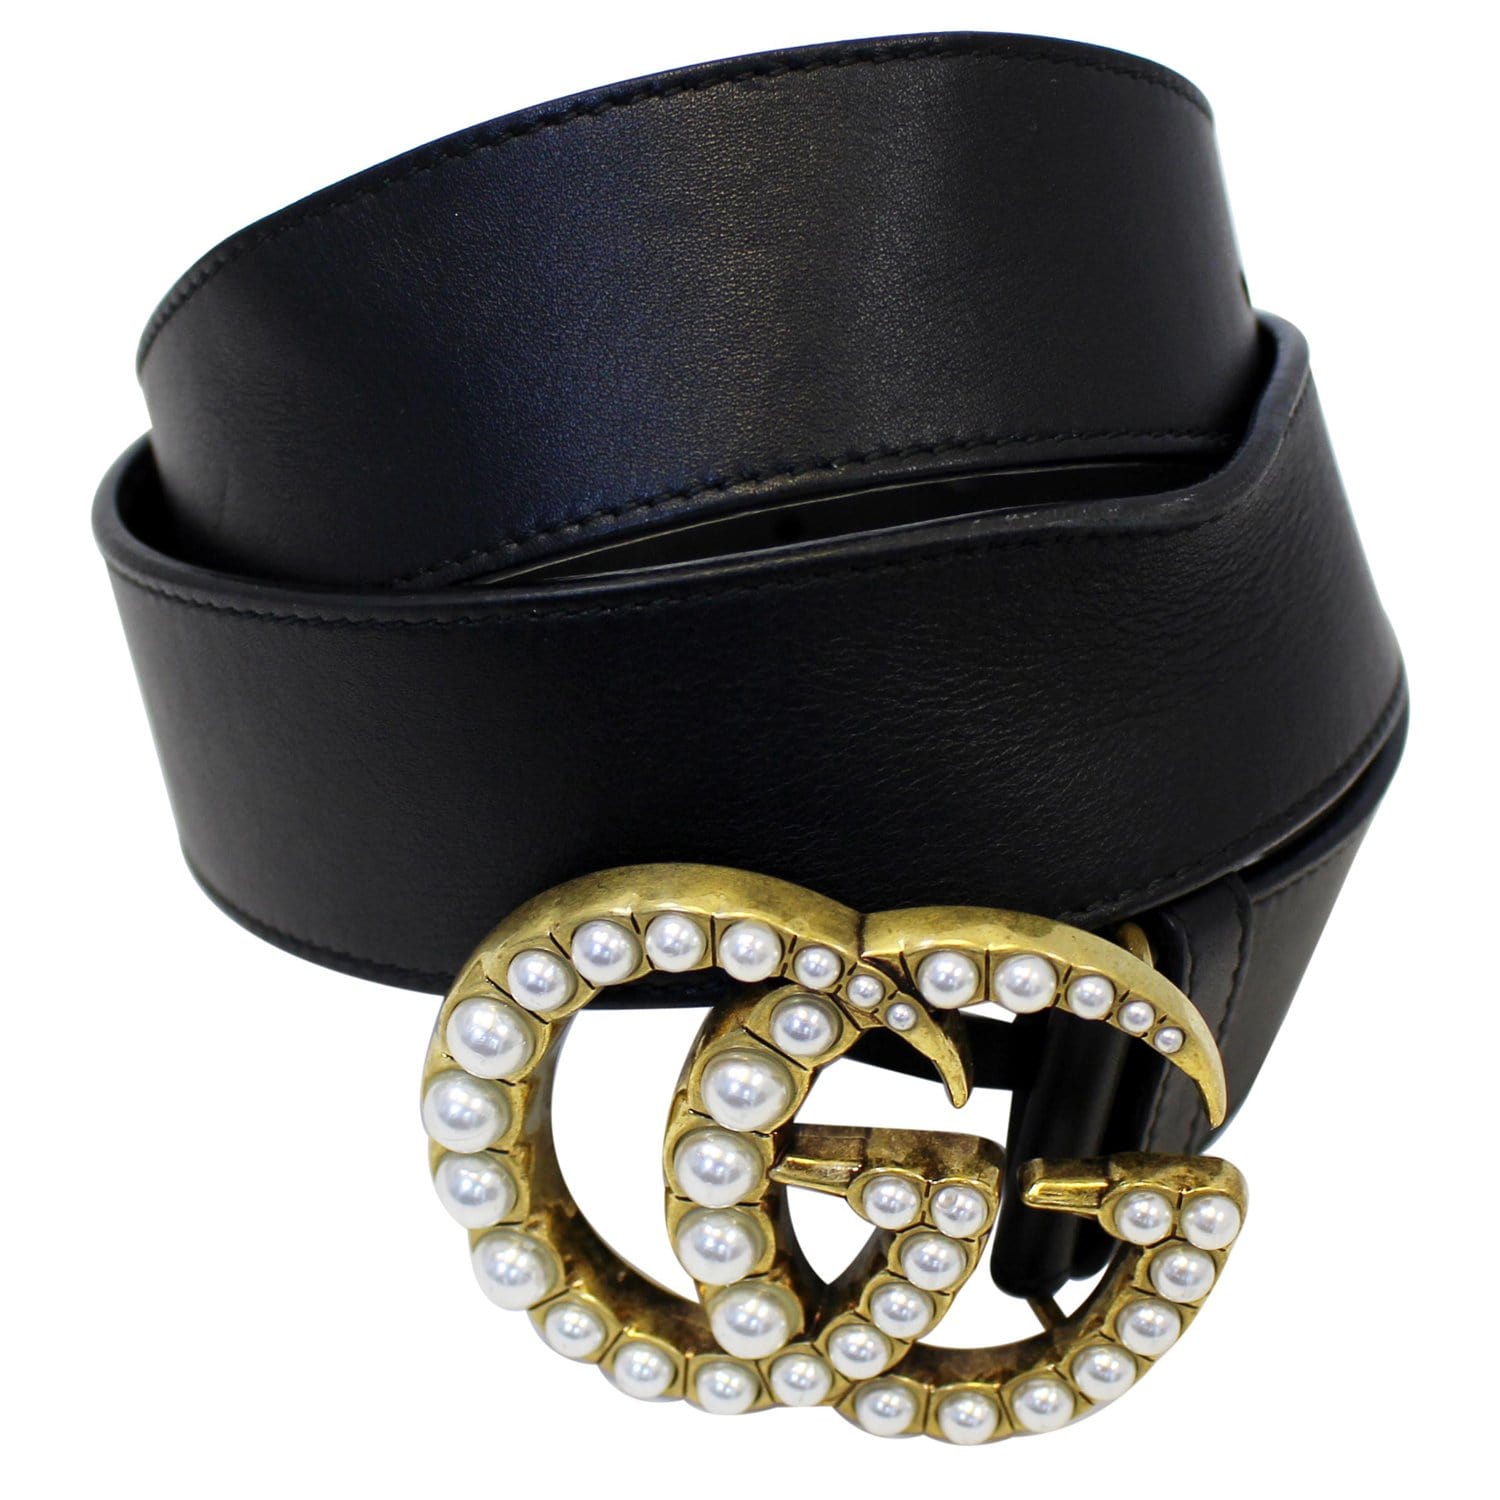 Gucci Leather belt with pearl Double G - Black